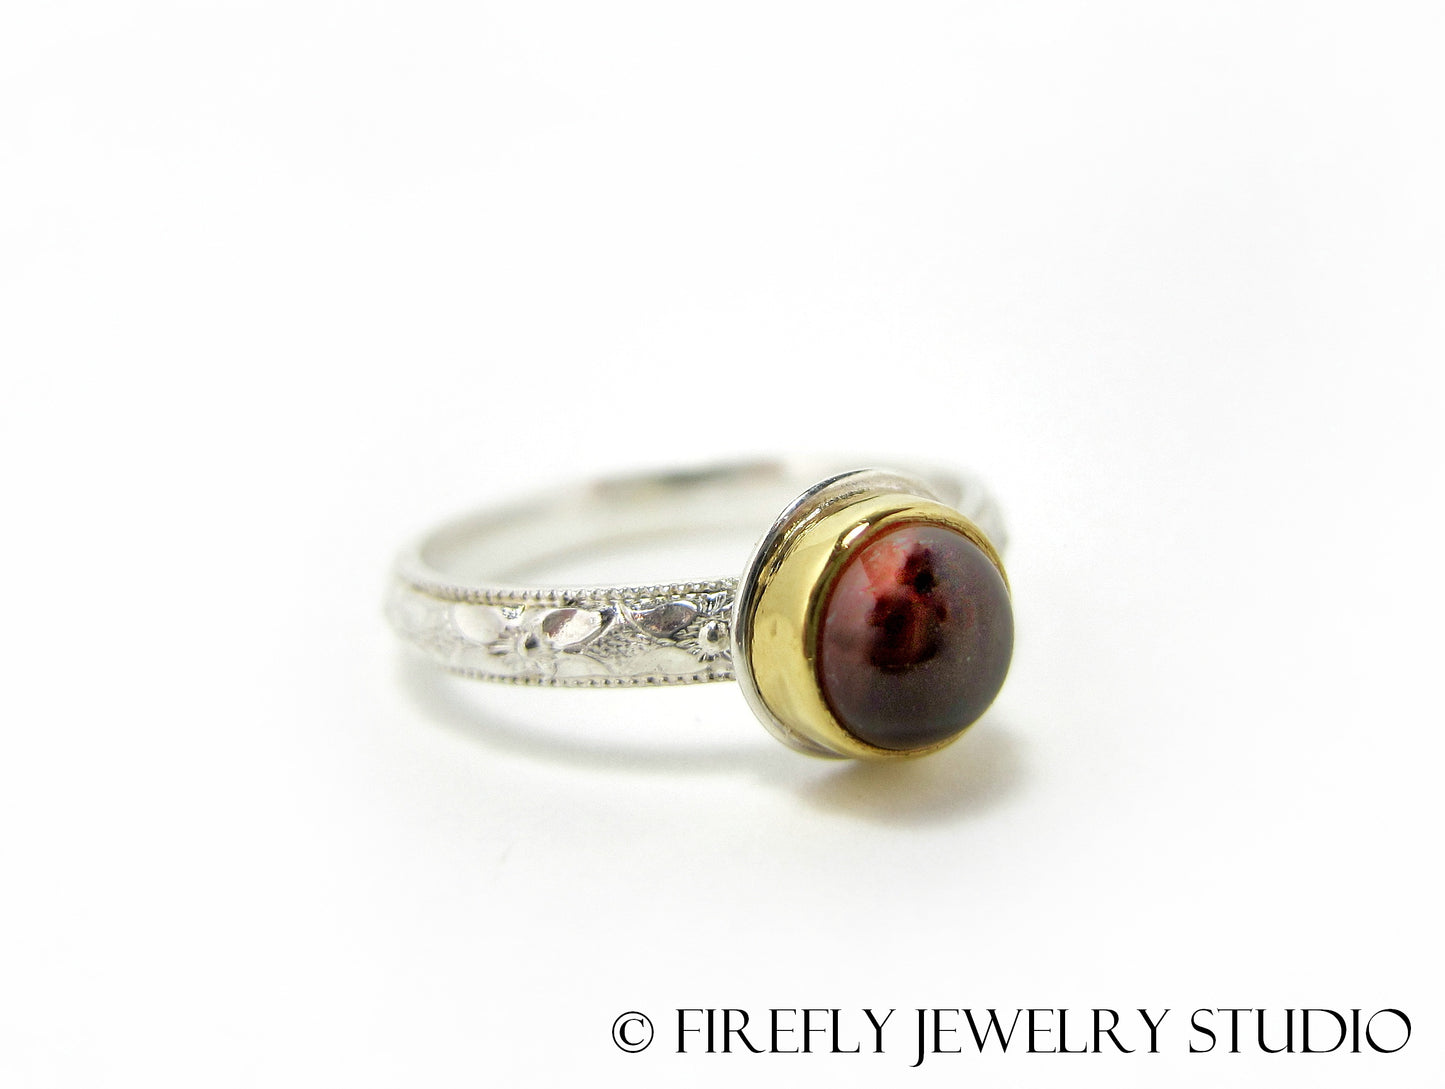 Sunstone Blood Moon Ring in 24k Gold and Sterling. Size 7 - Firefly Jewelry Studio